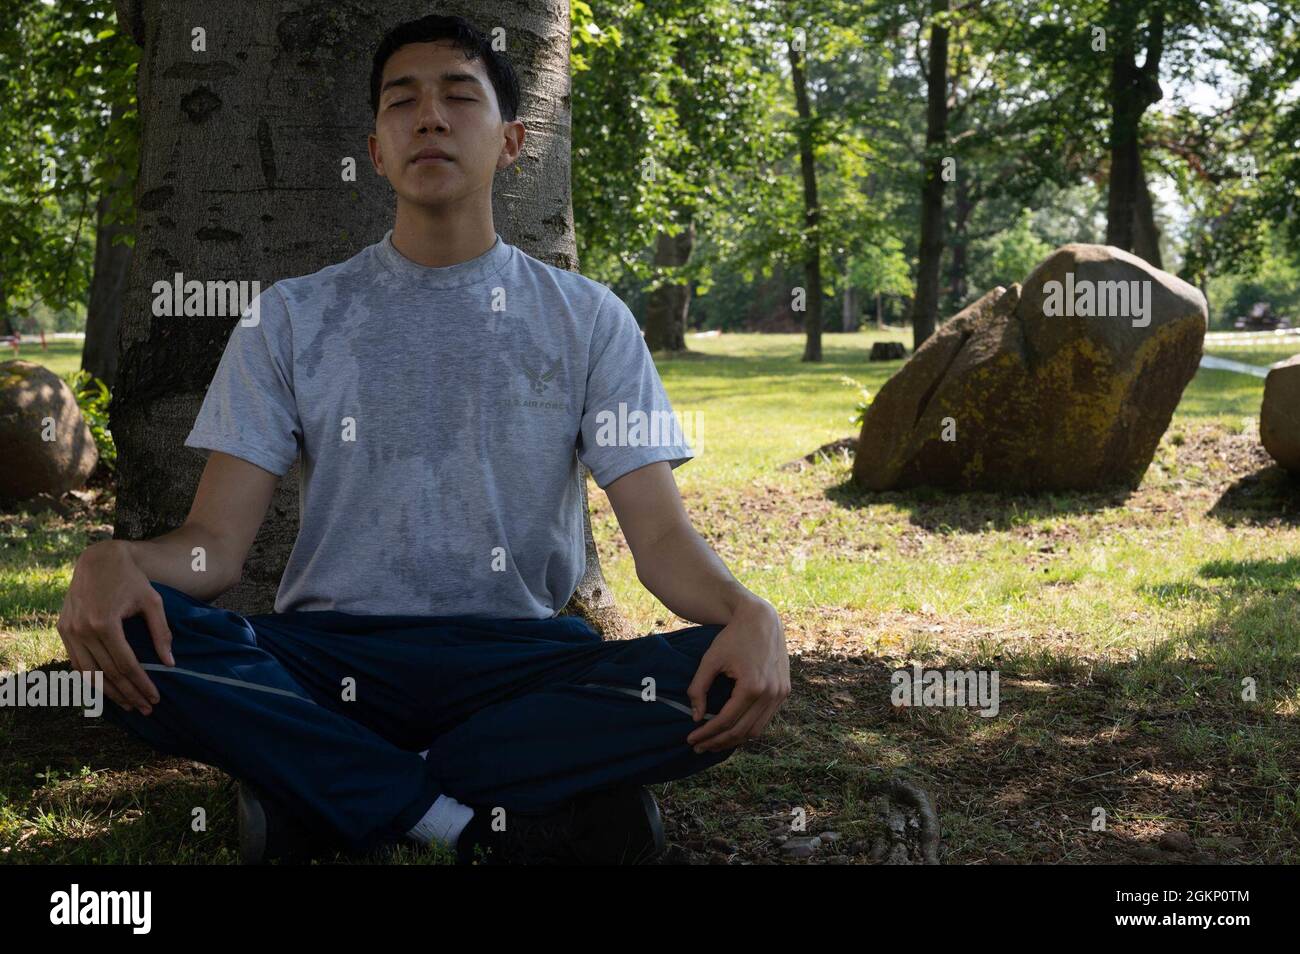 U.S. Air Force Airman Edgar Grimaldo, 86th Airlift Wing Public Affairs apprentice rests under a tree at Ramstein Air Base, Germany, June 9, 2021. According to the 86 AW safety office, as temperatures increase frequent breaks are recommended when playing outdoors to keep a healthy lifestyle. Stock Photo